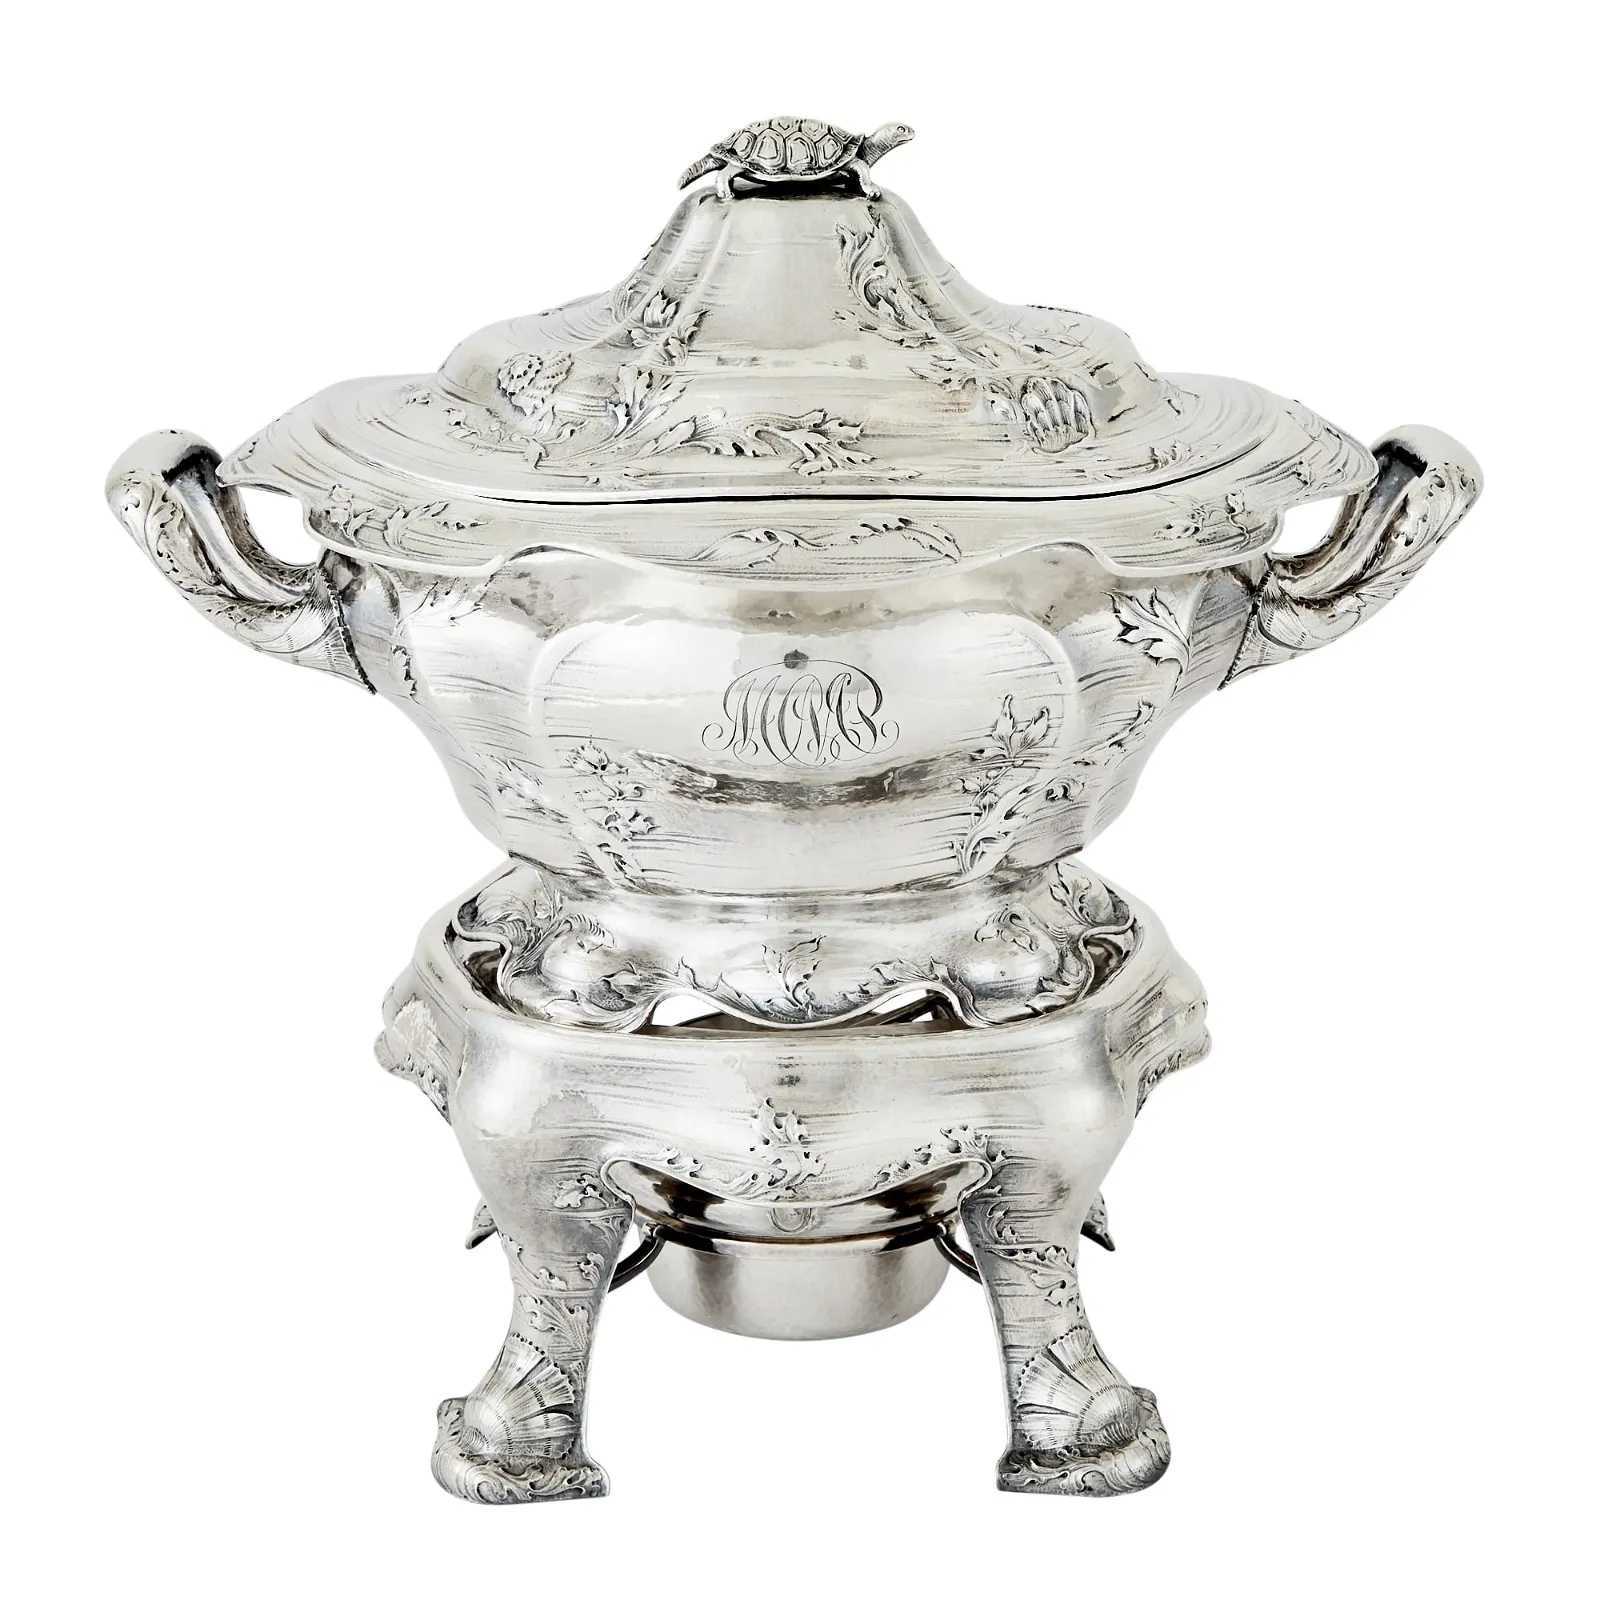 Gorham Martelé Sterling Silver Covered Terrapin Soup Tureen on Stand, estimated at $10,000-$20,000 at Doyle.